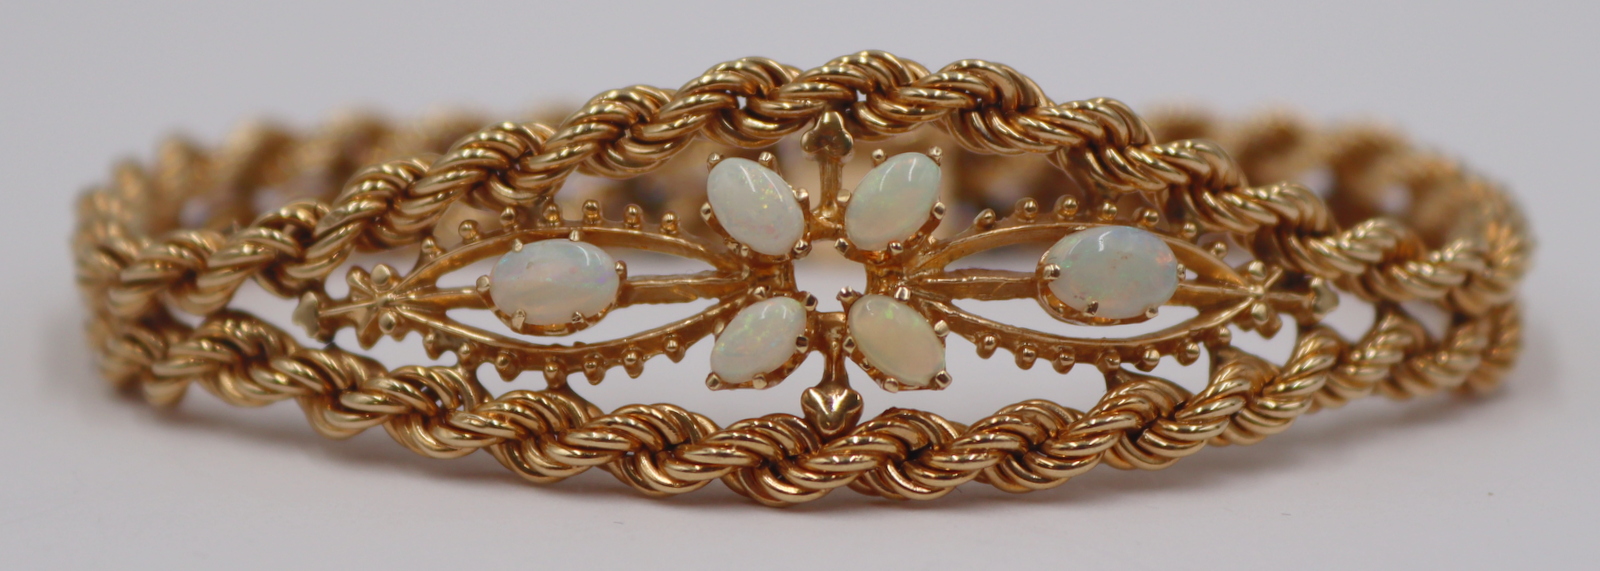 JEWELRY 14KT GOLD AND OPAL BRACELET  3bc7a3